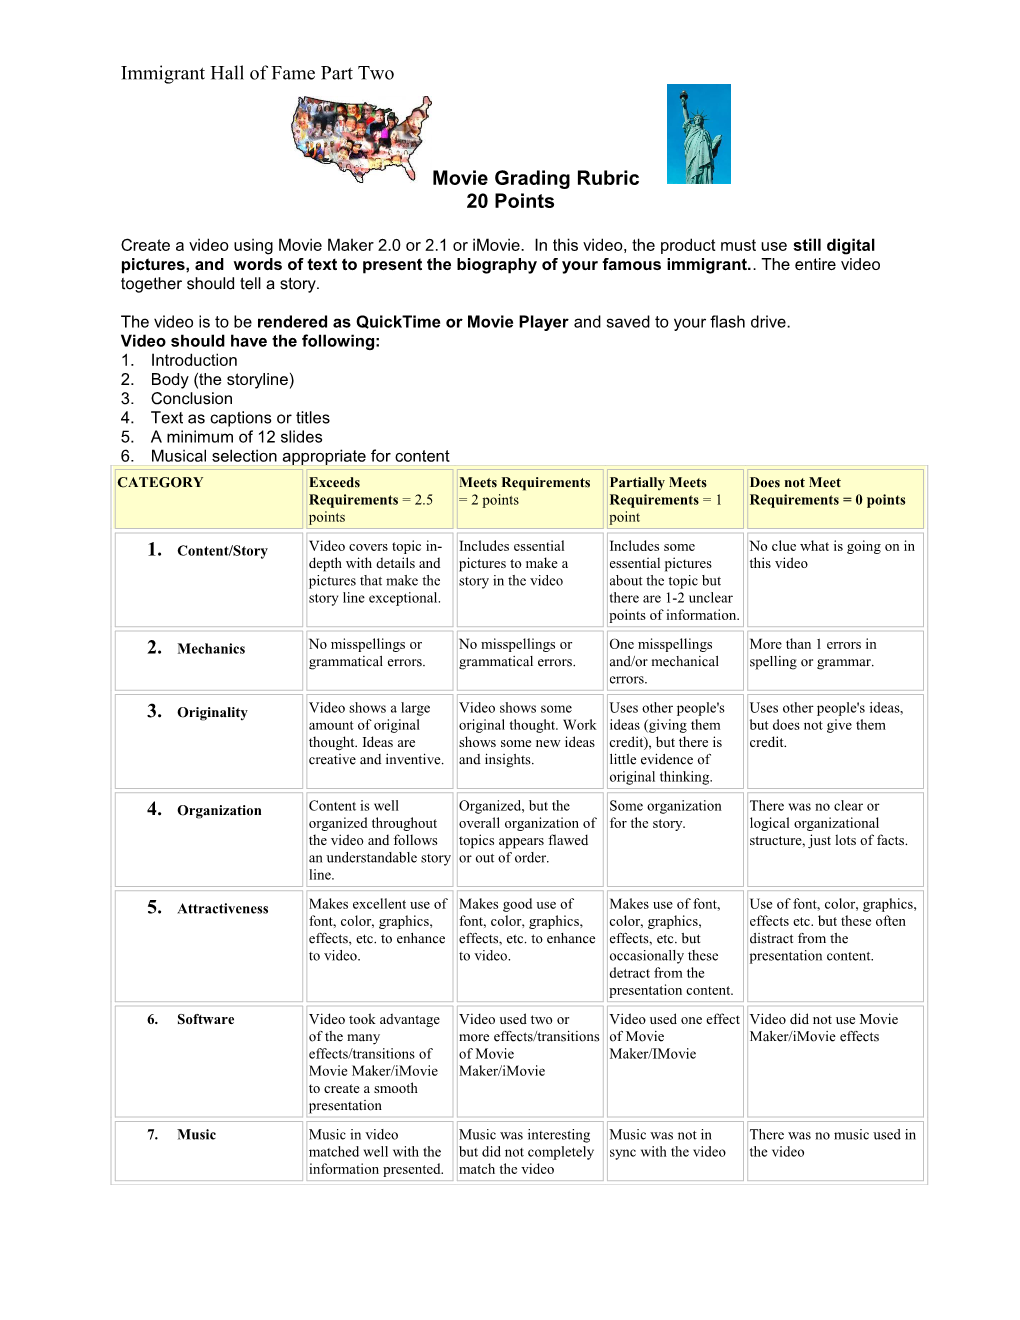 Assignment 2 and Grading Rubric